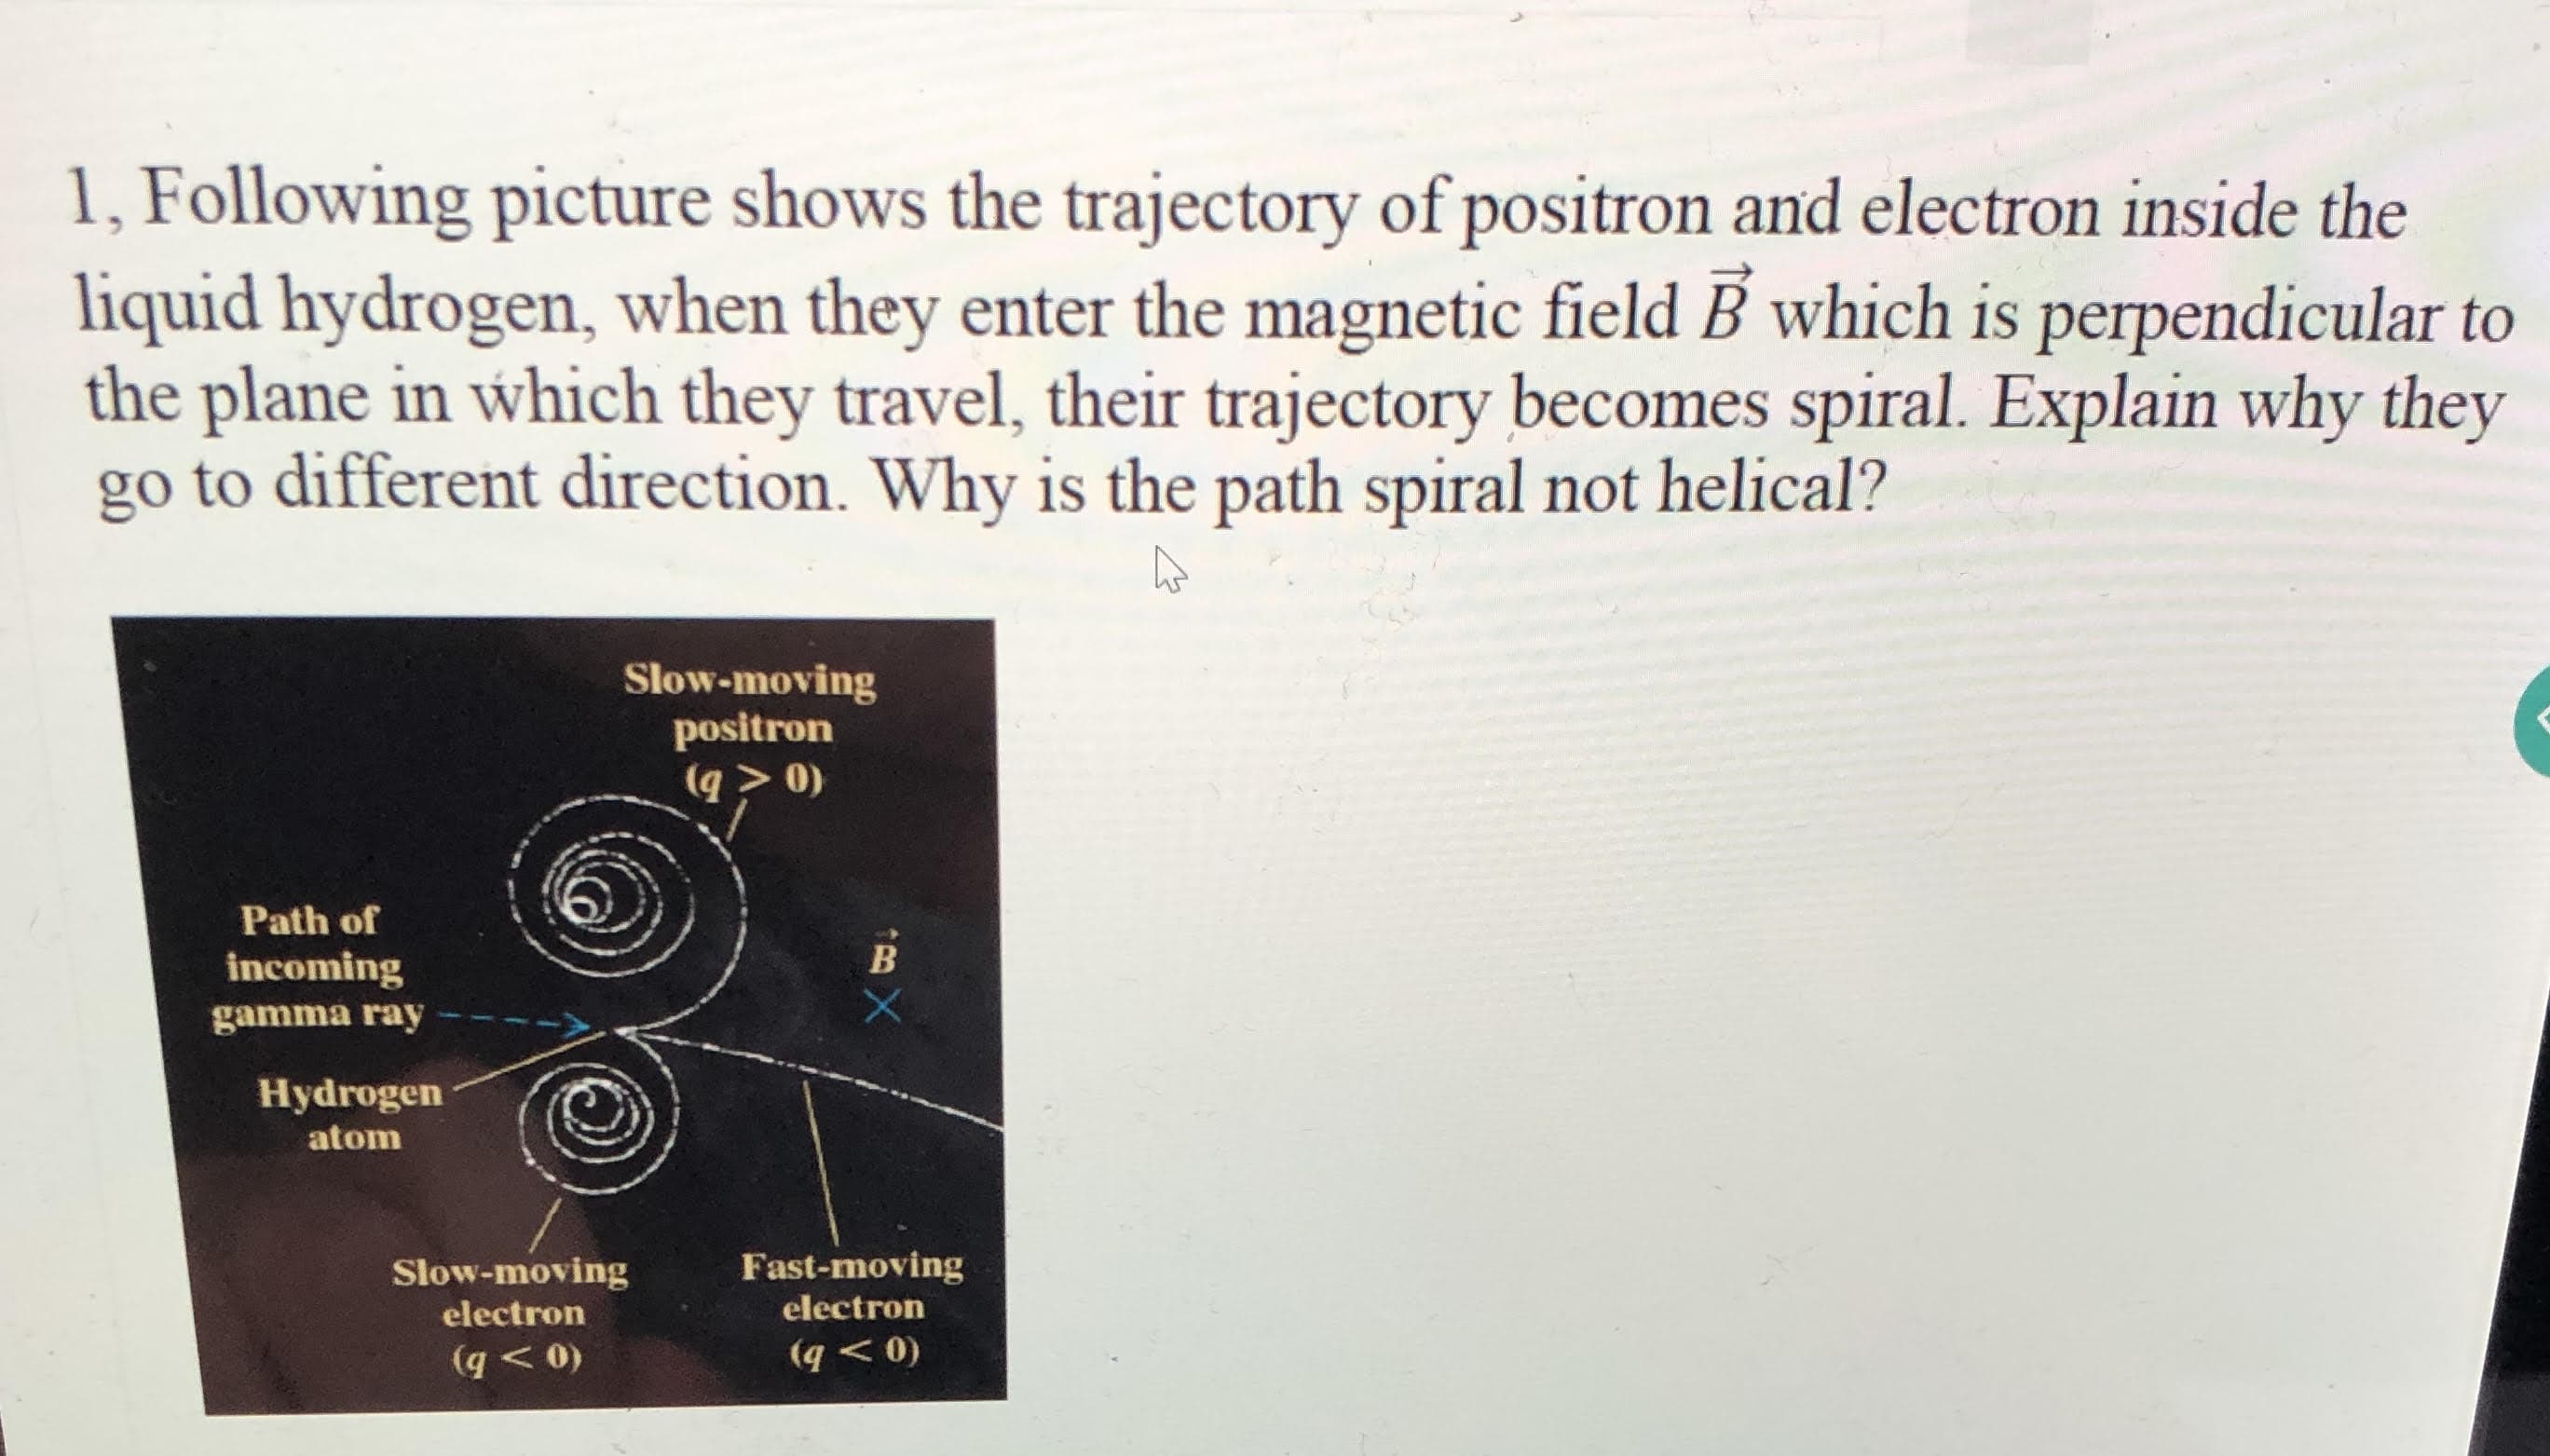 1, Following picture shows the trajectory of positron and electron inside the
liquid hydrogen, when they enter the magnetic field B which is perpendicular to
the plane in which they travel, their trajectory becomes spiral. Explain why they
go to different direction. Why is the path spiral not helical?
